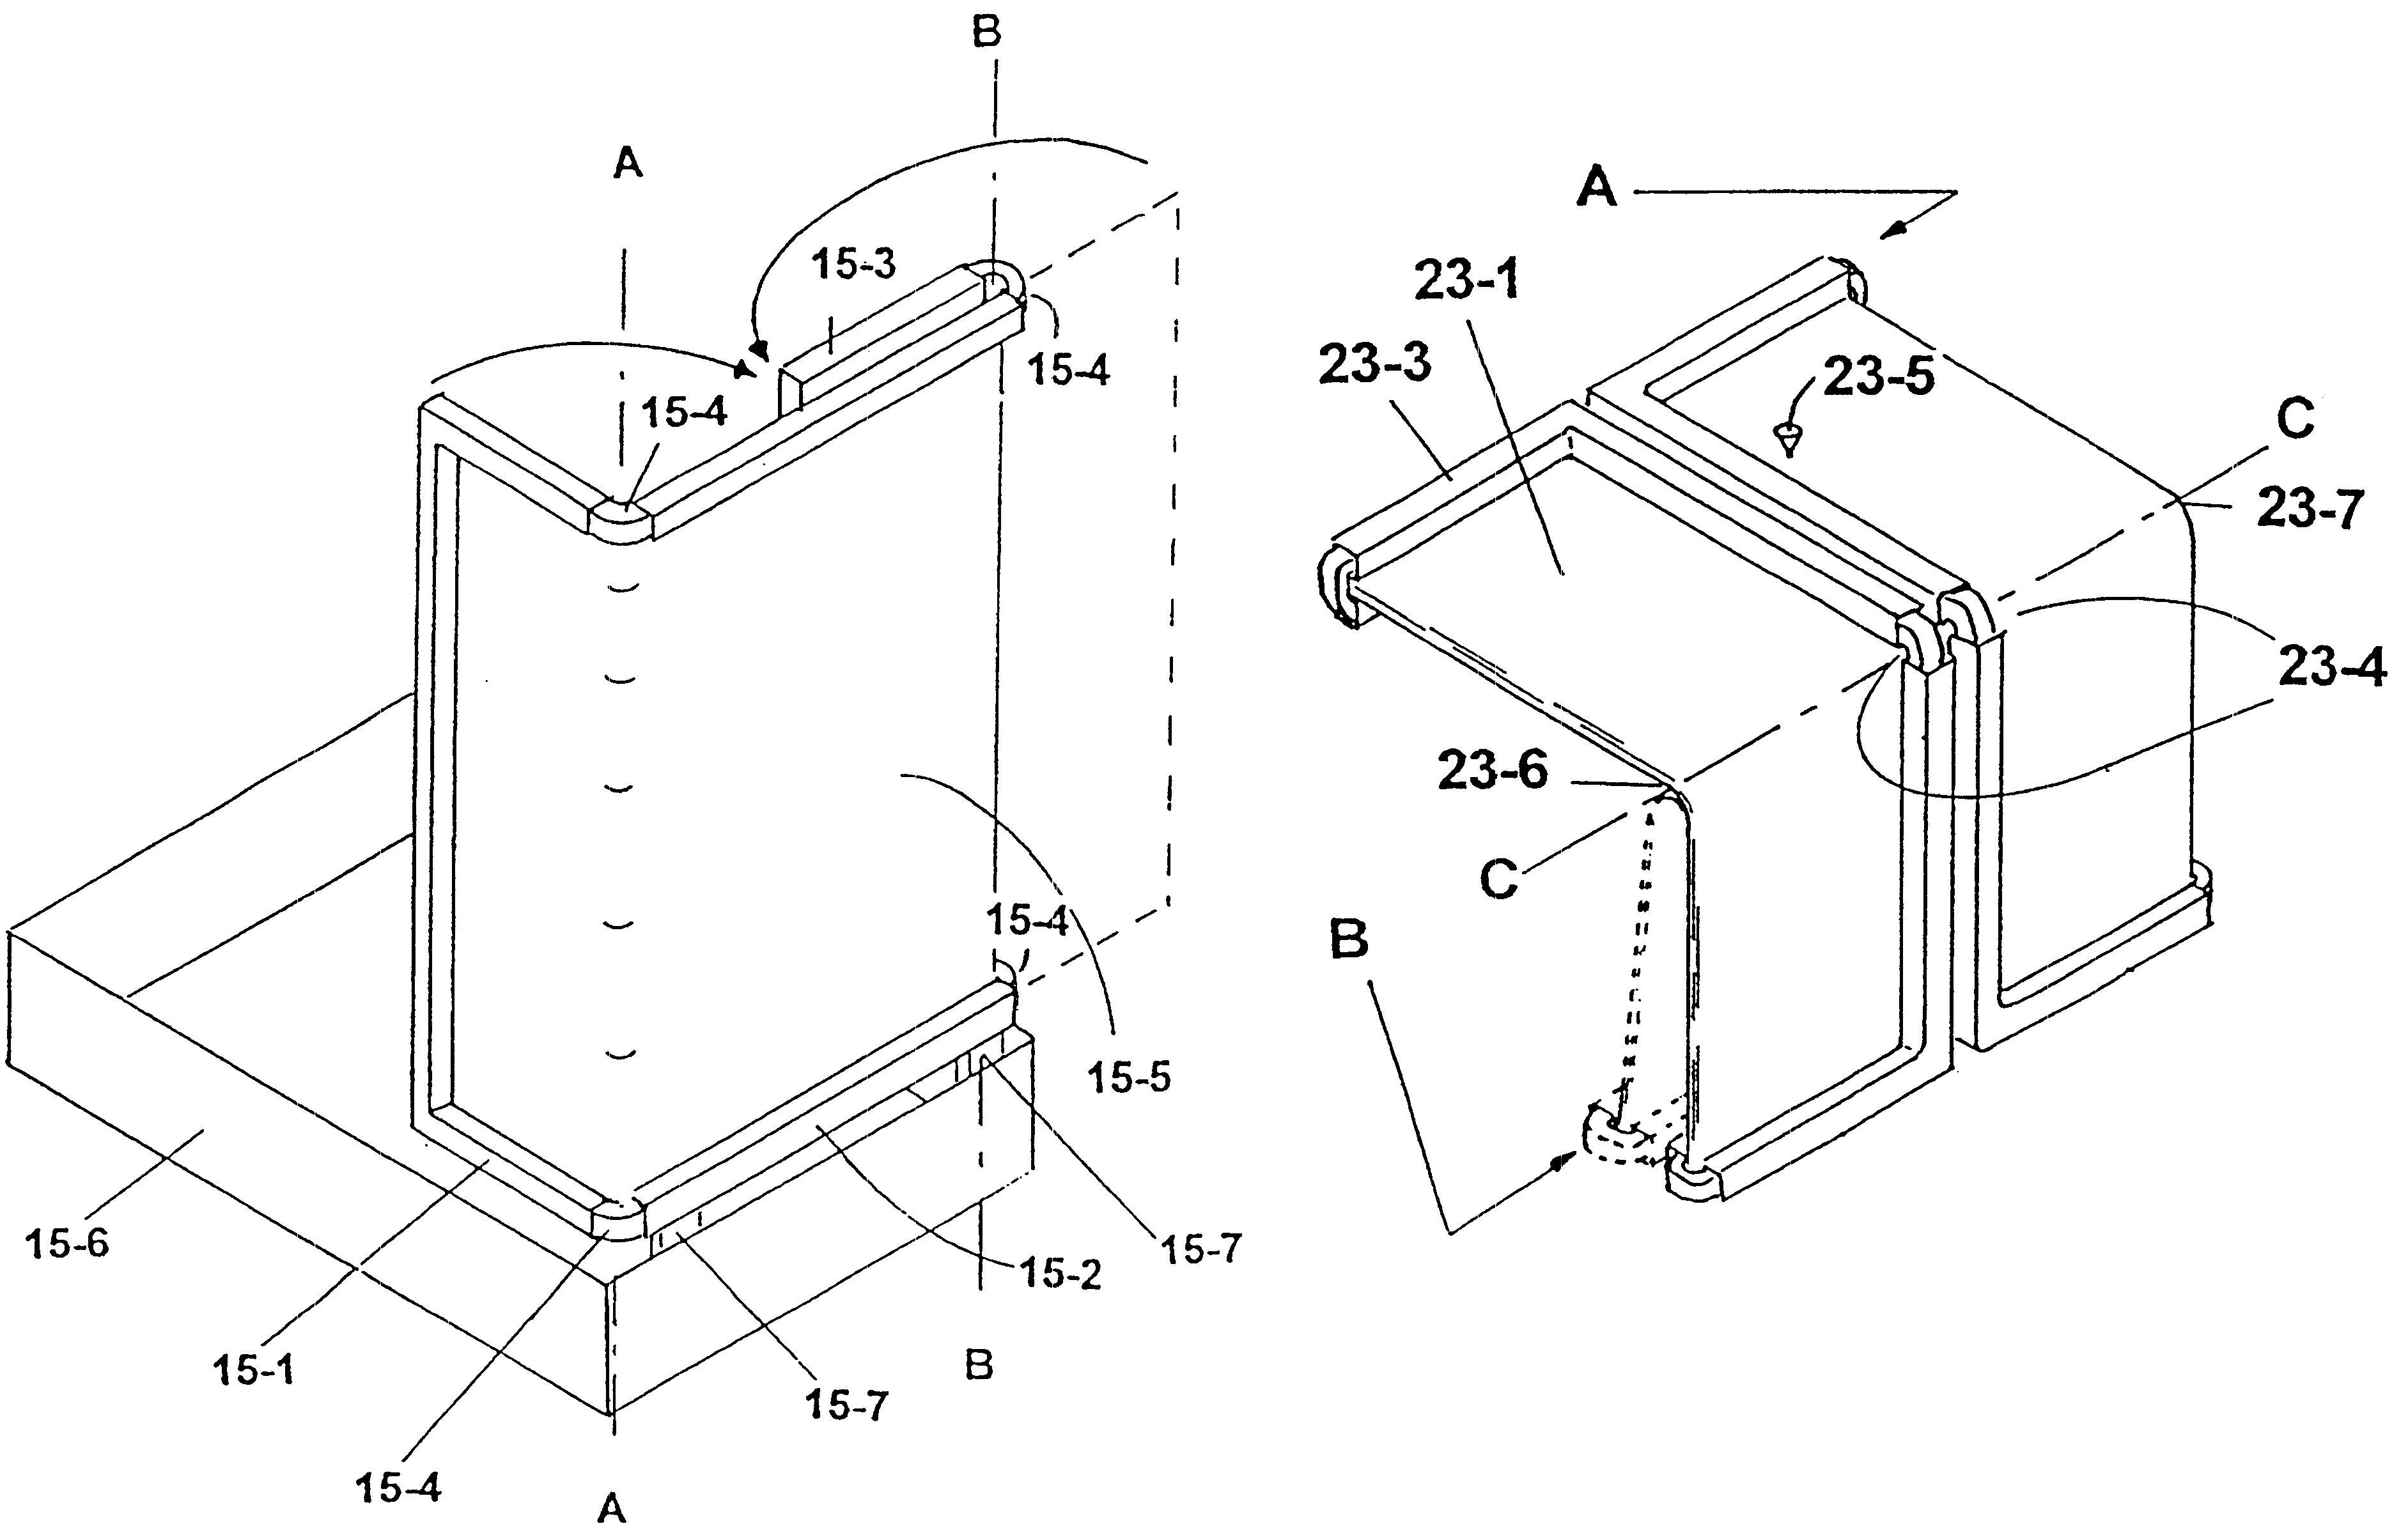 Portable visual display device with a collapsible presentation screen